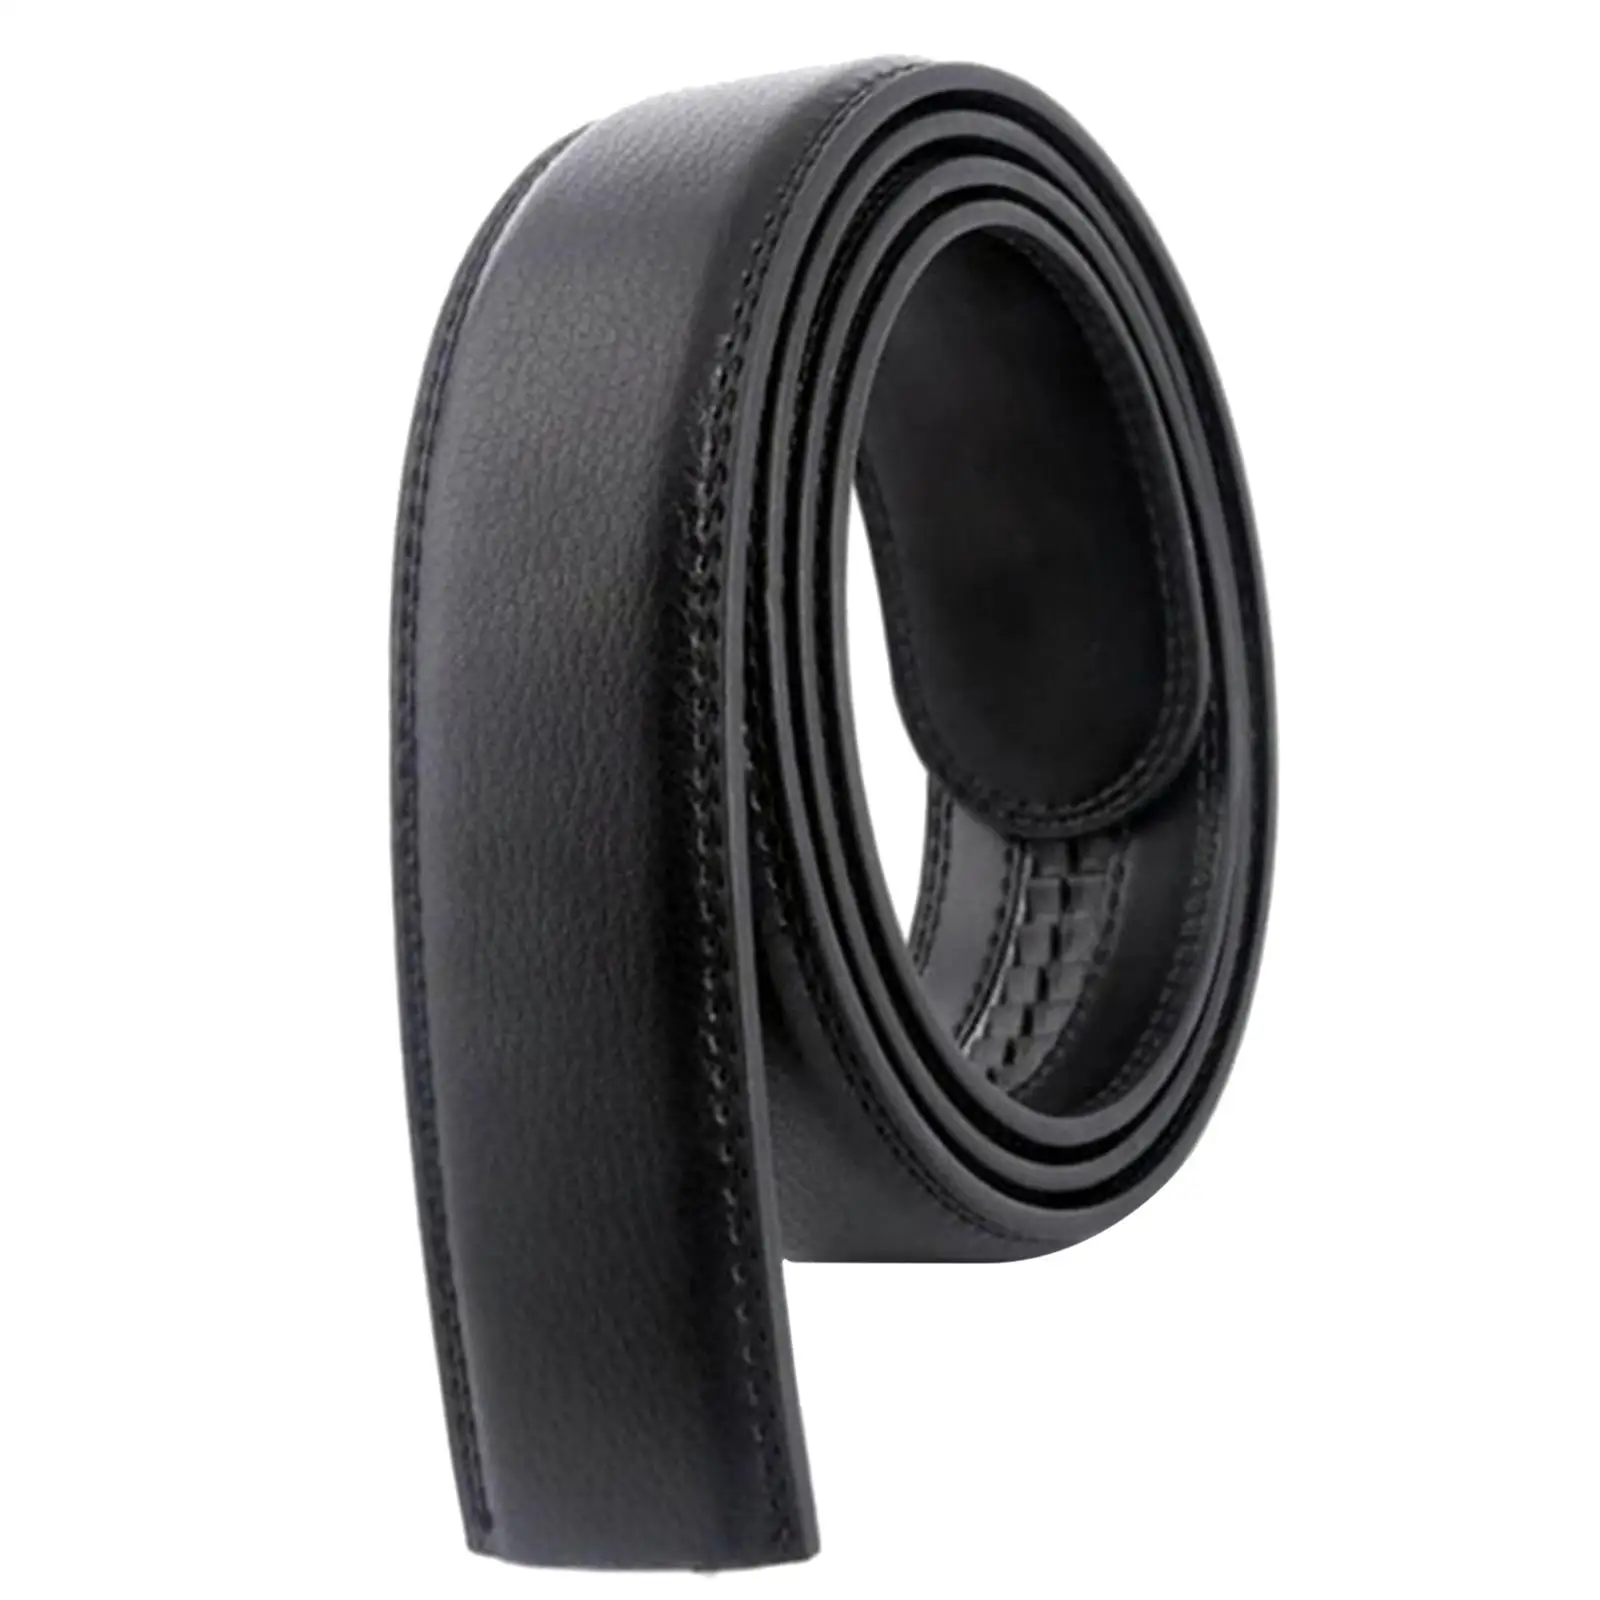 Casual Leather Belt 3.5cm Wide Replacement Waistband No Holes No Buckle 49inch Men Belt for Trousers Clothing Automatic Buckle